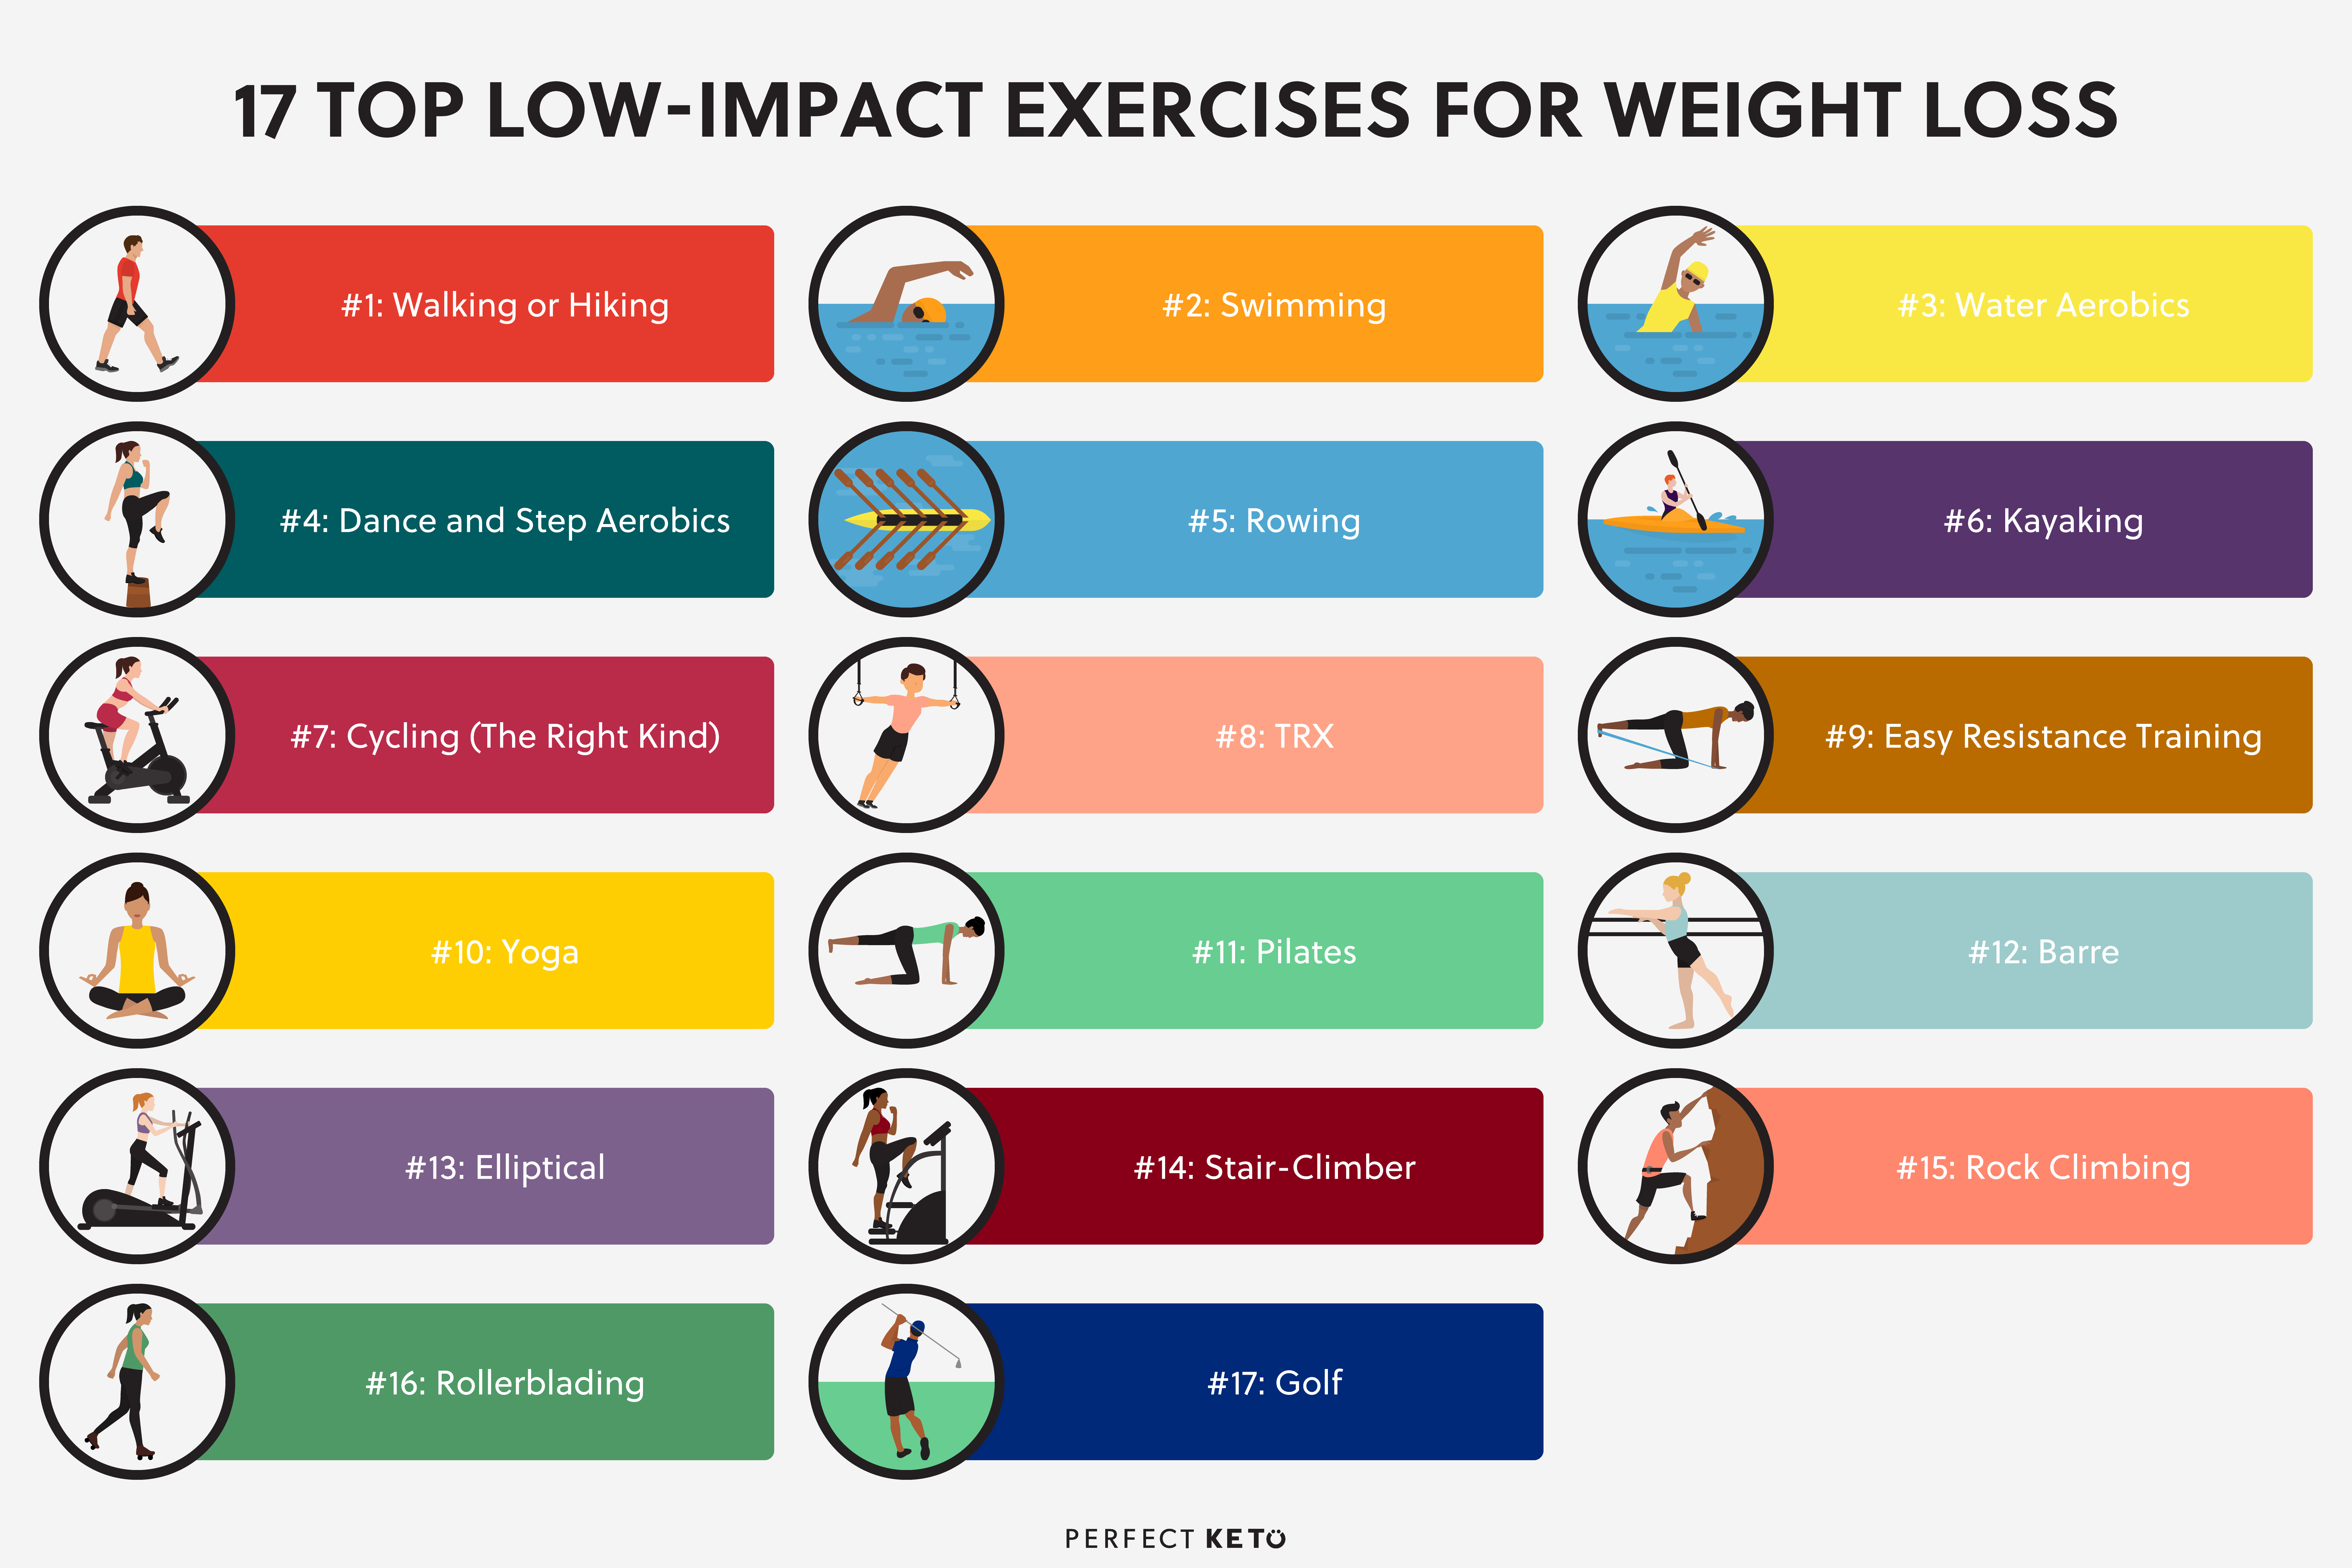 Low-Impact Exercise vs. High-Intensity Training for Weight Loss